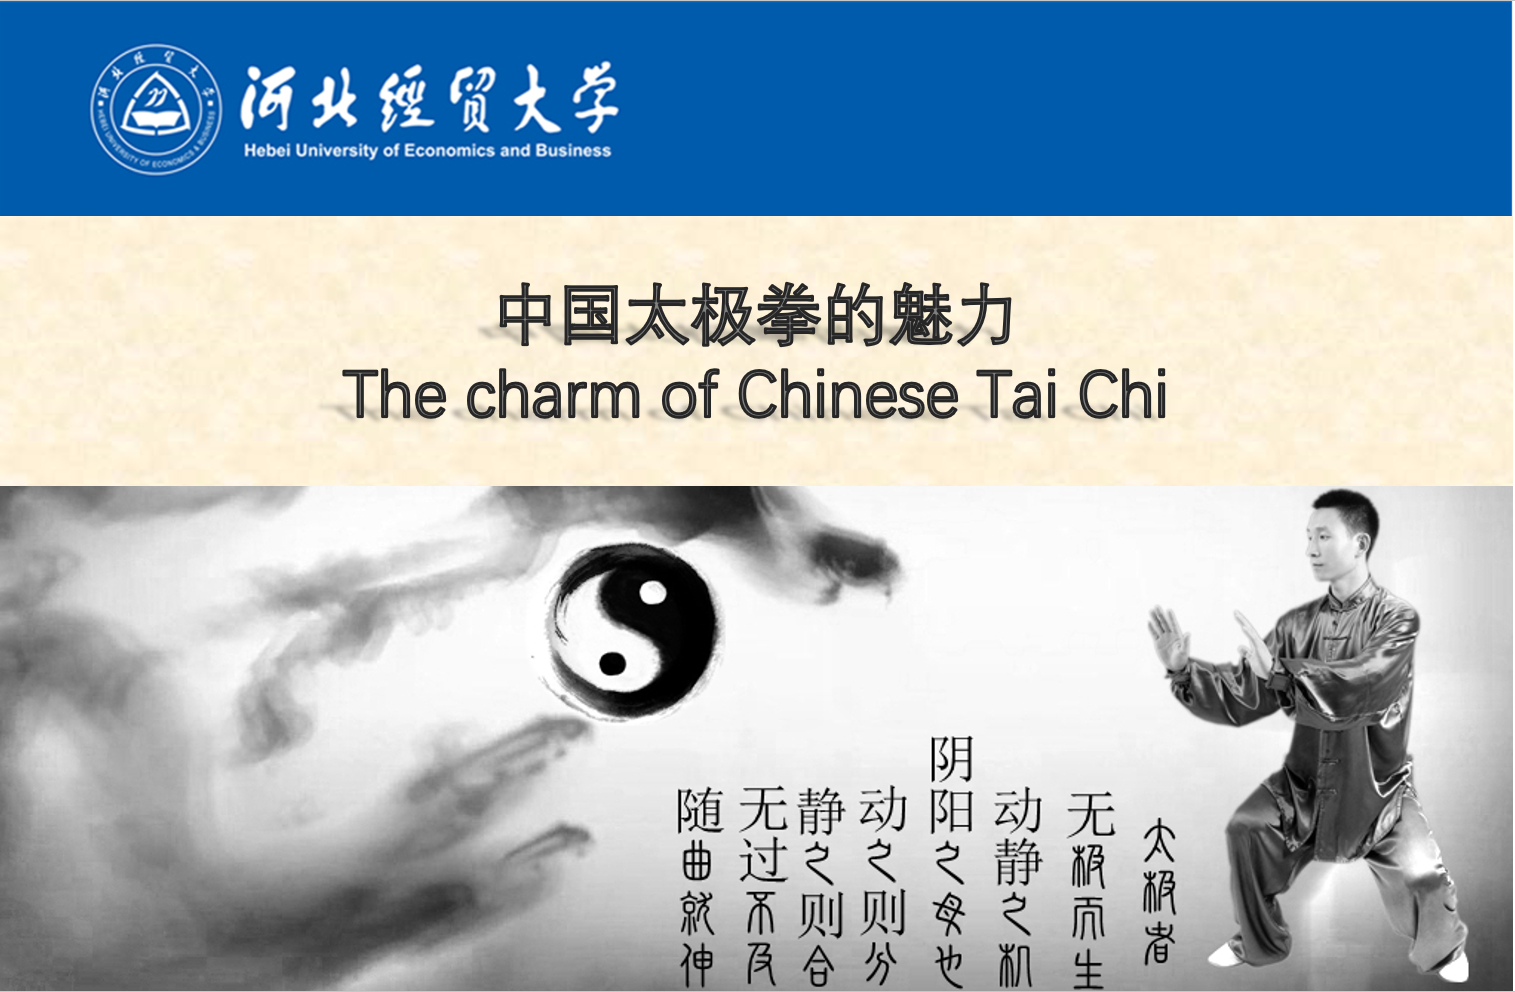 Learn about Tai Chi